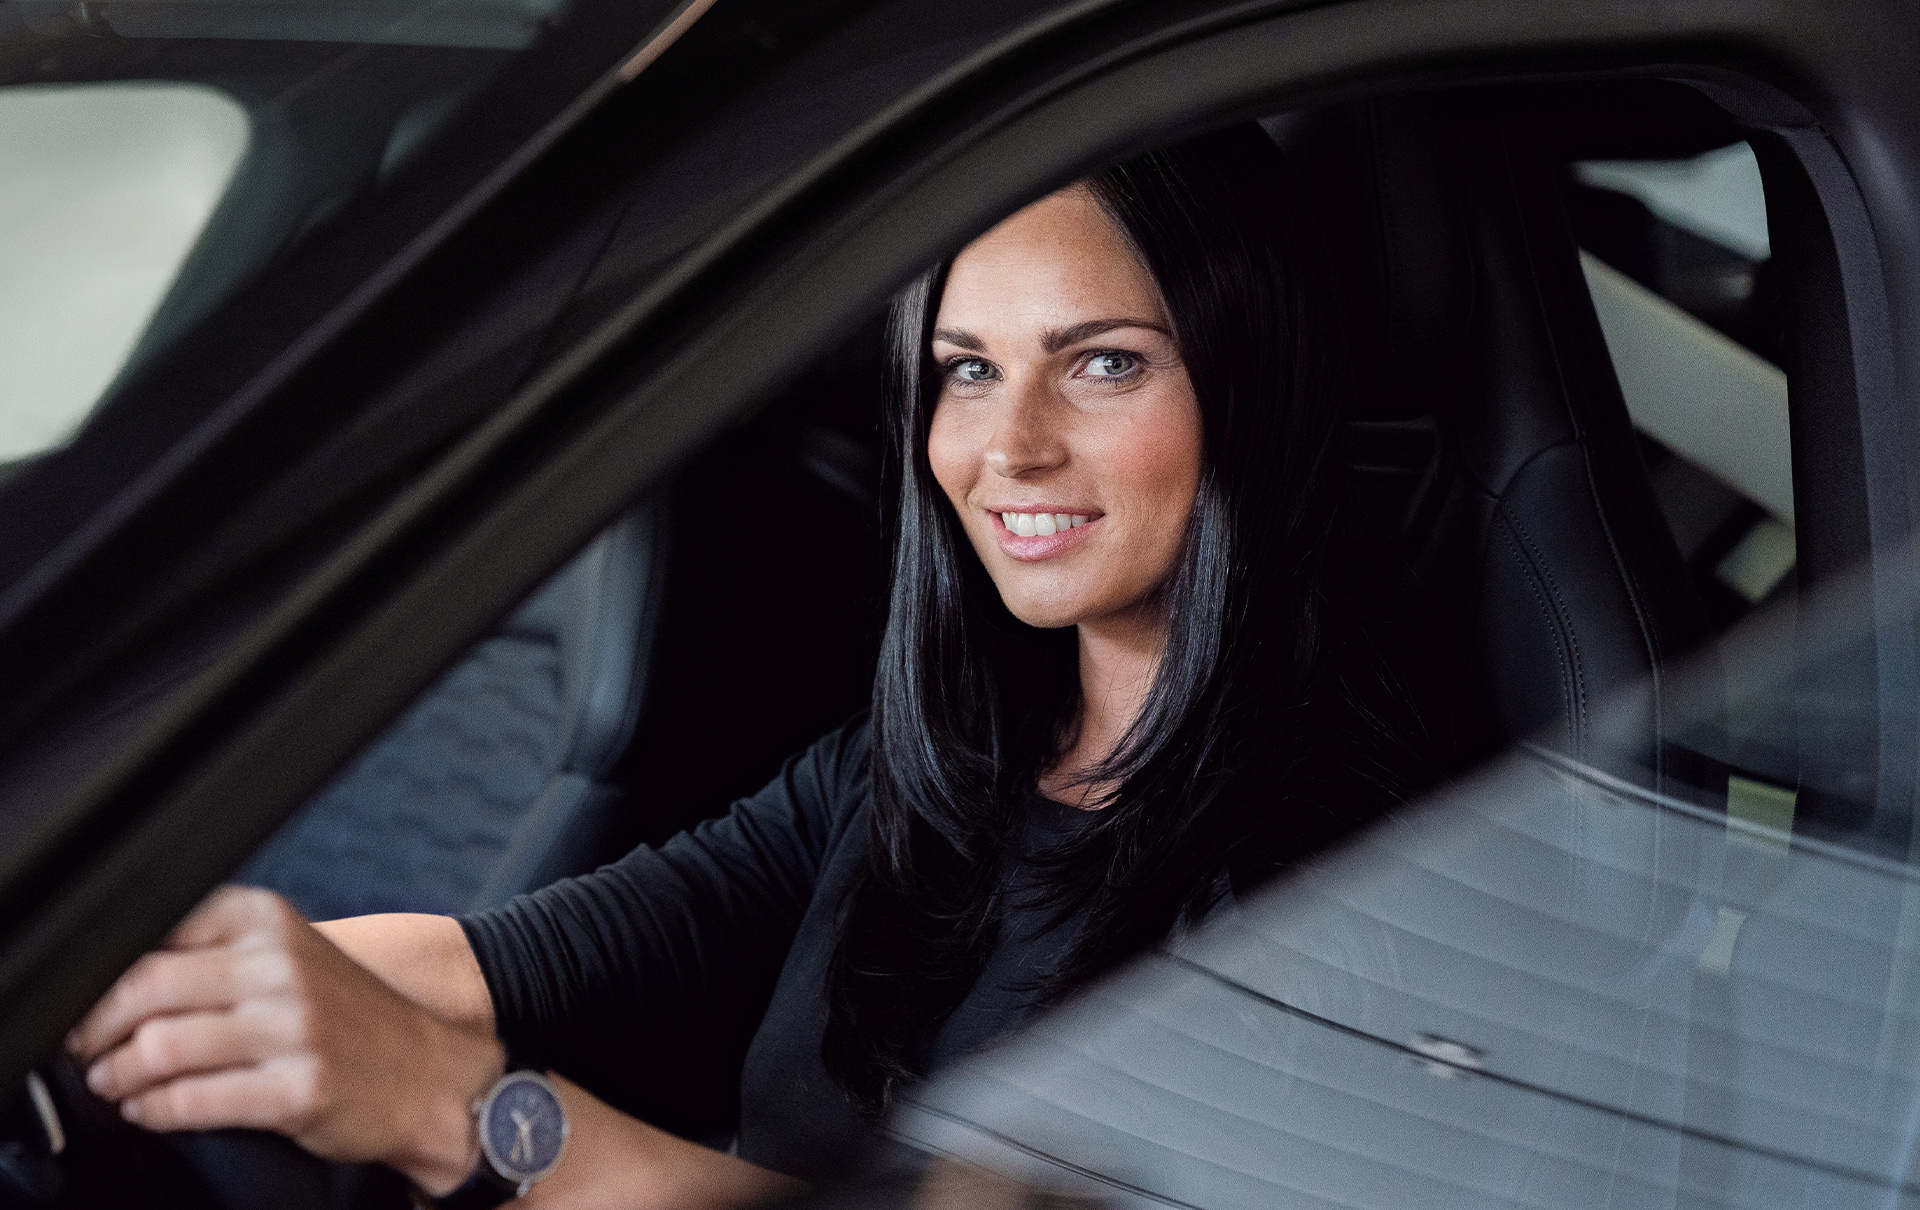 Anna Veith sits at the steering wheel in the Audi e-tron GT{ft_e-tron-gt} and looks into the camera.